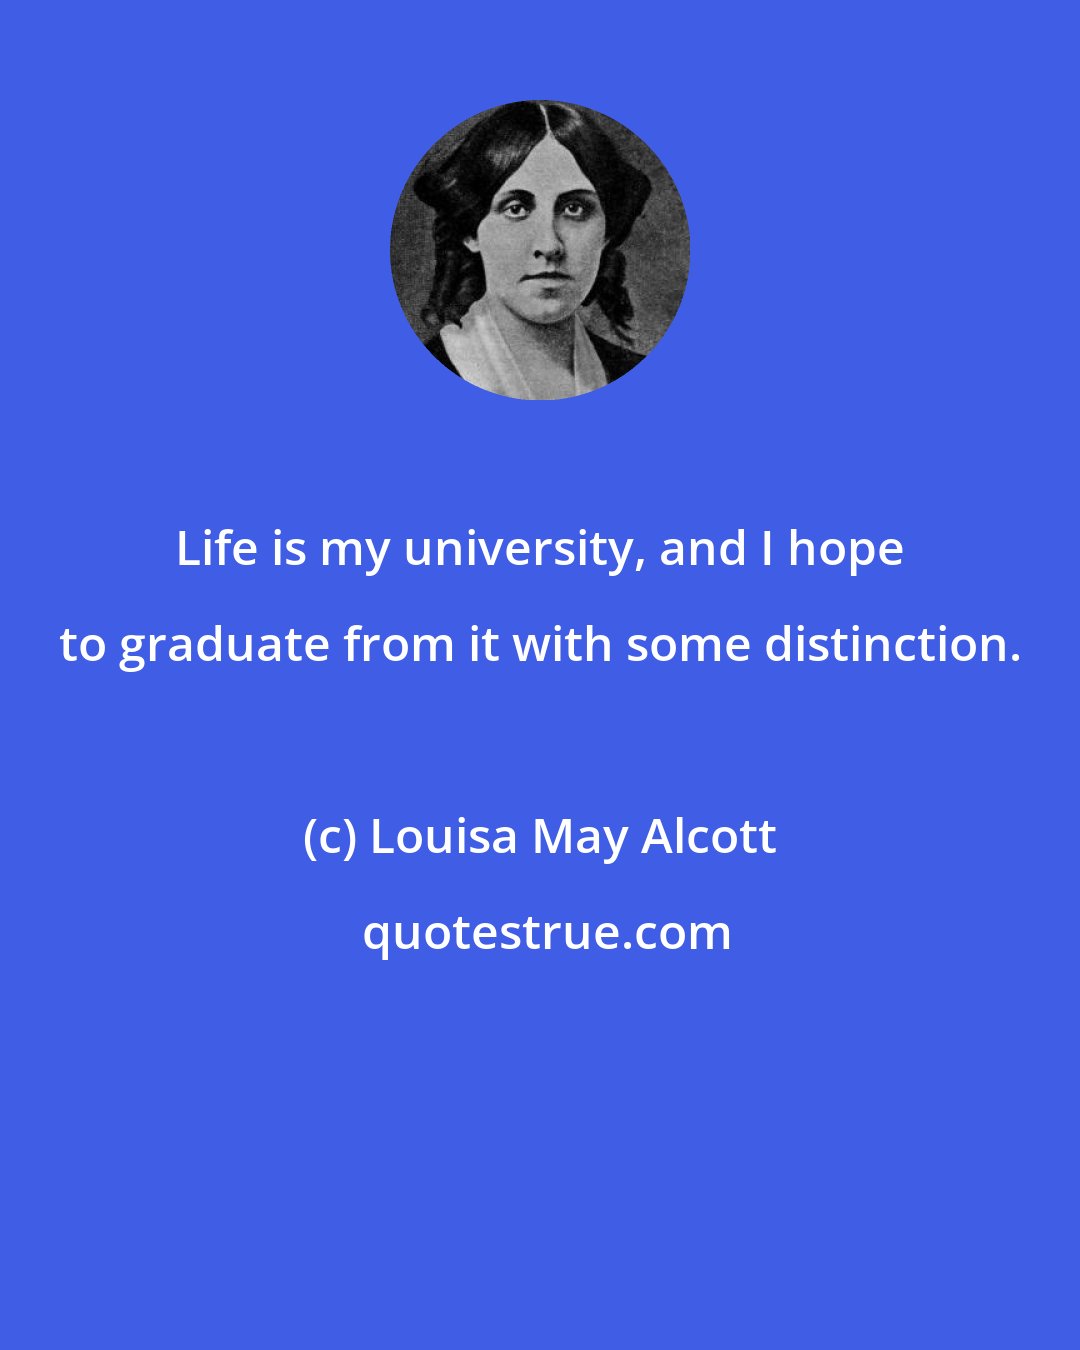 Louisa May Alcott: Life is my university, and I hope to graduate from it with some distinction.